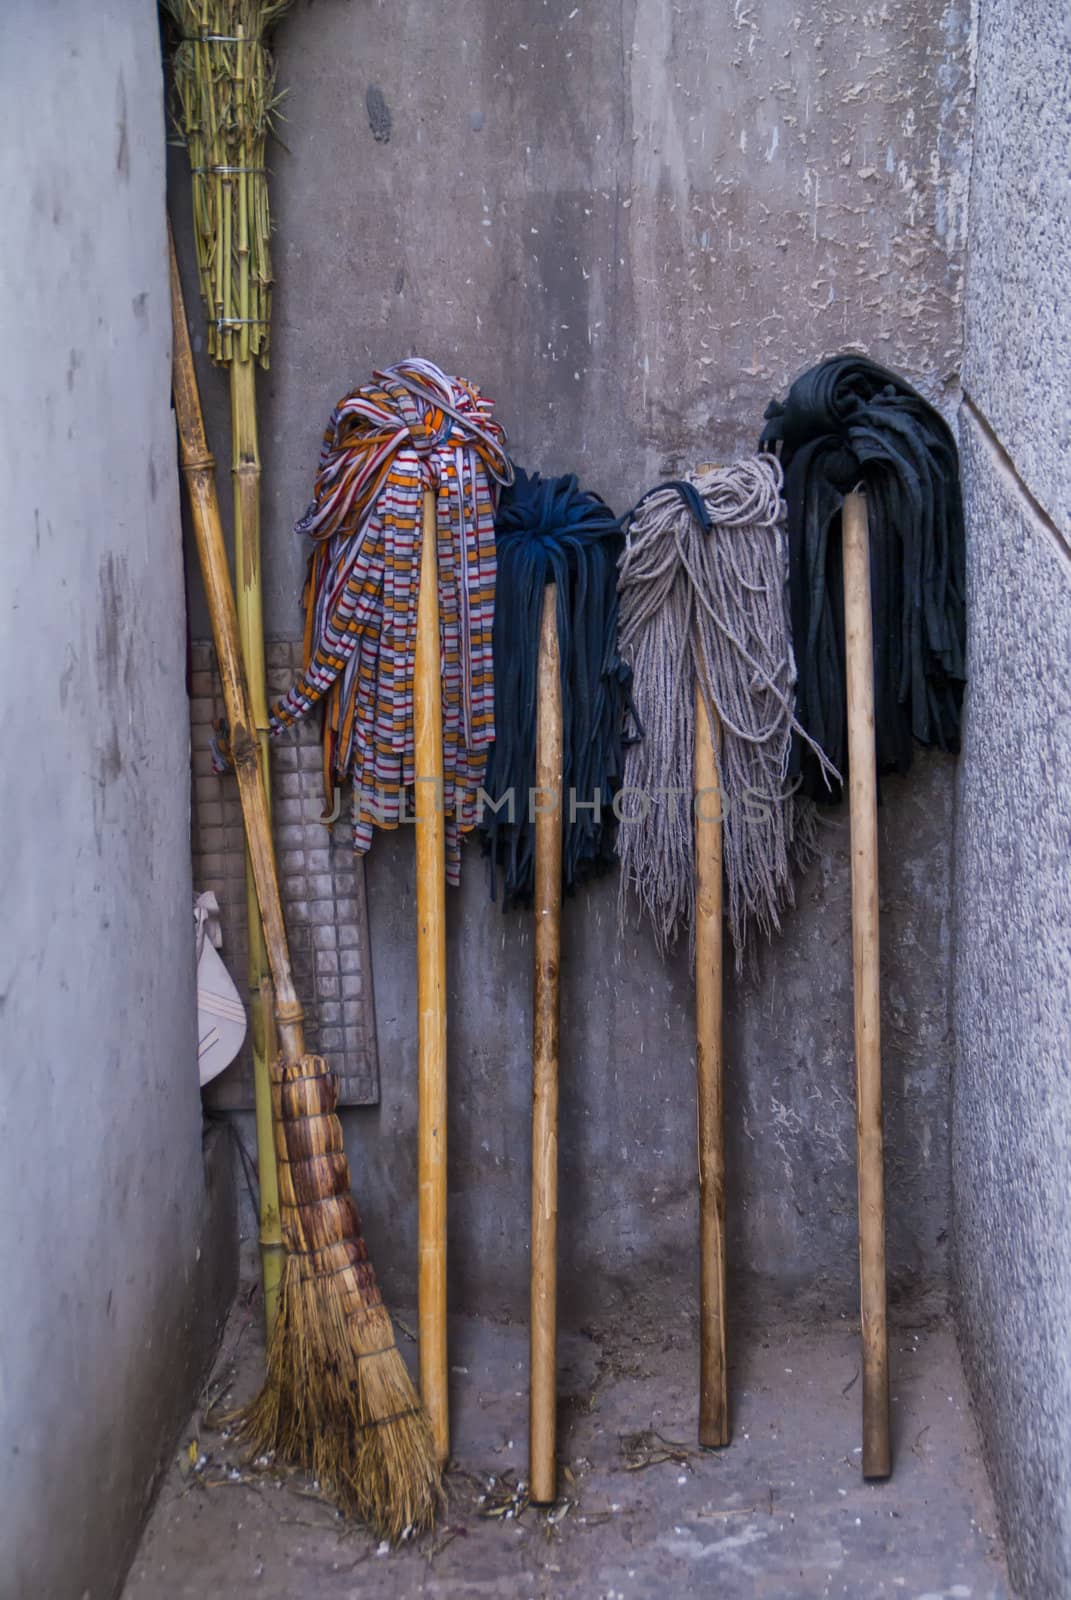 Beijing collection of brooms. by Claudine